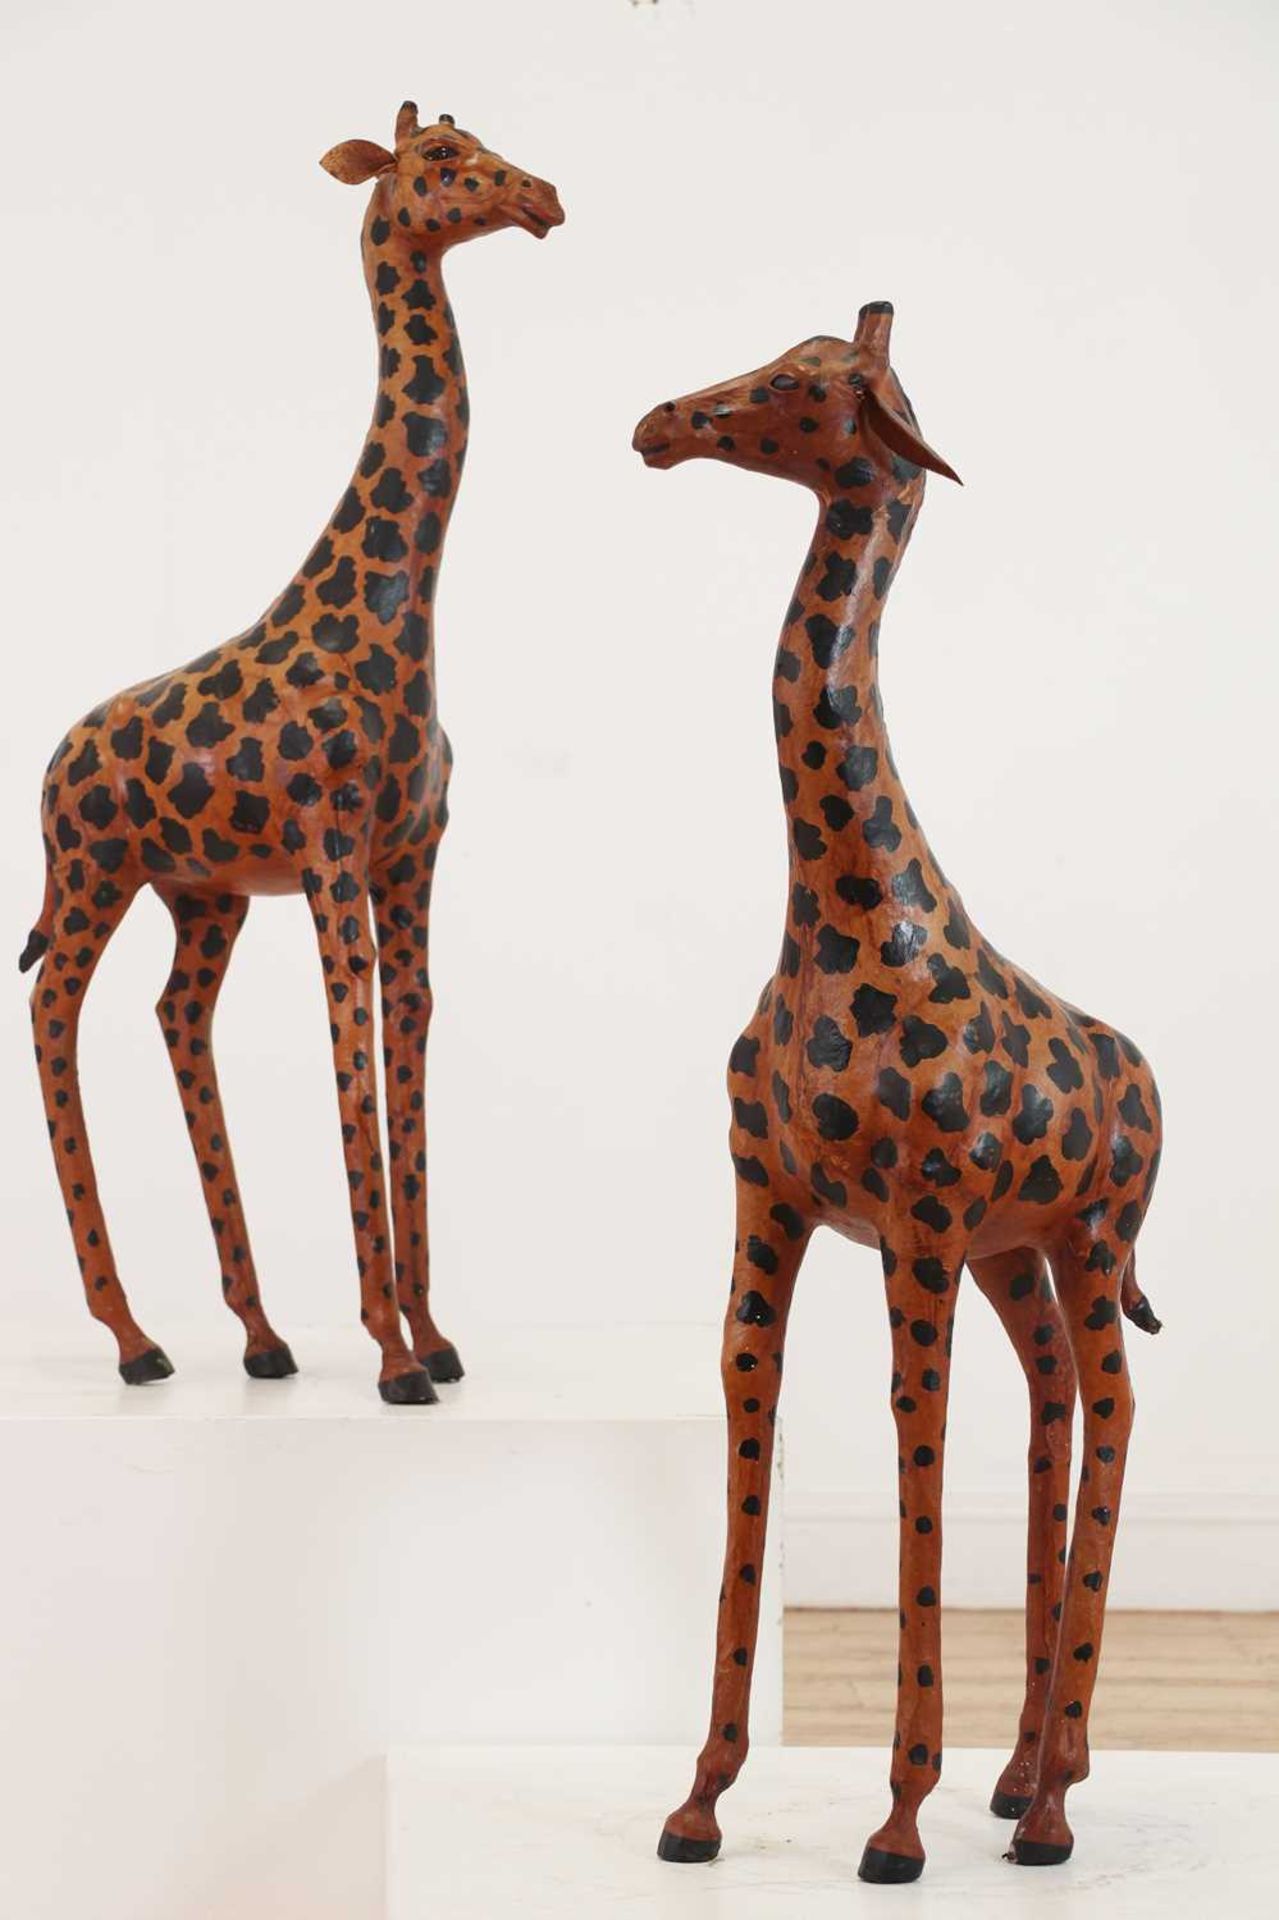 A pair of painted hide figures of giraffes, - Image 4 of 30